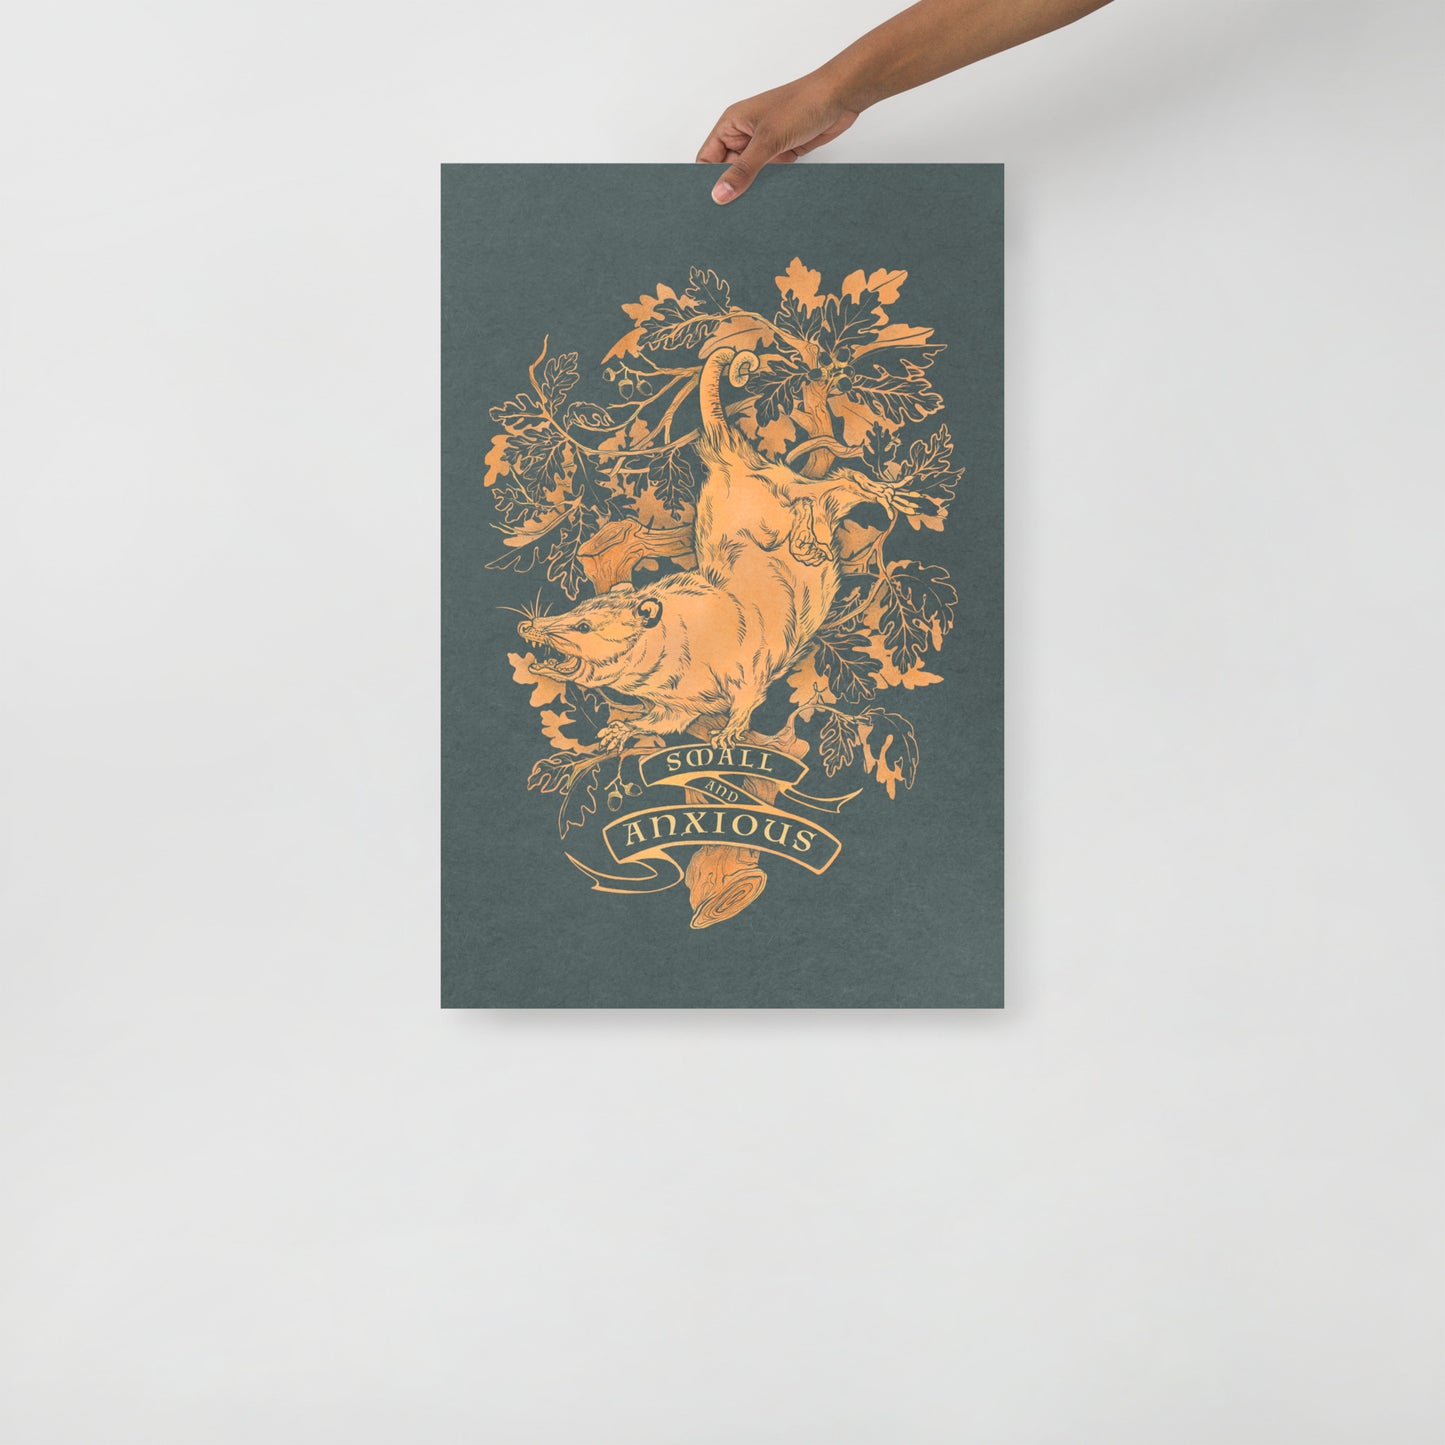 Small and Anxious: Print